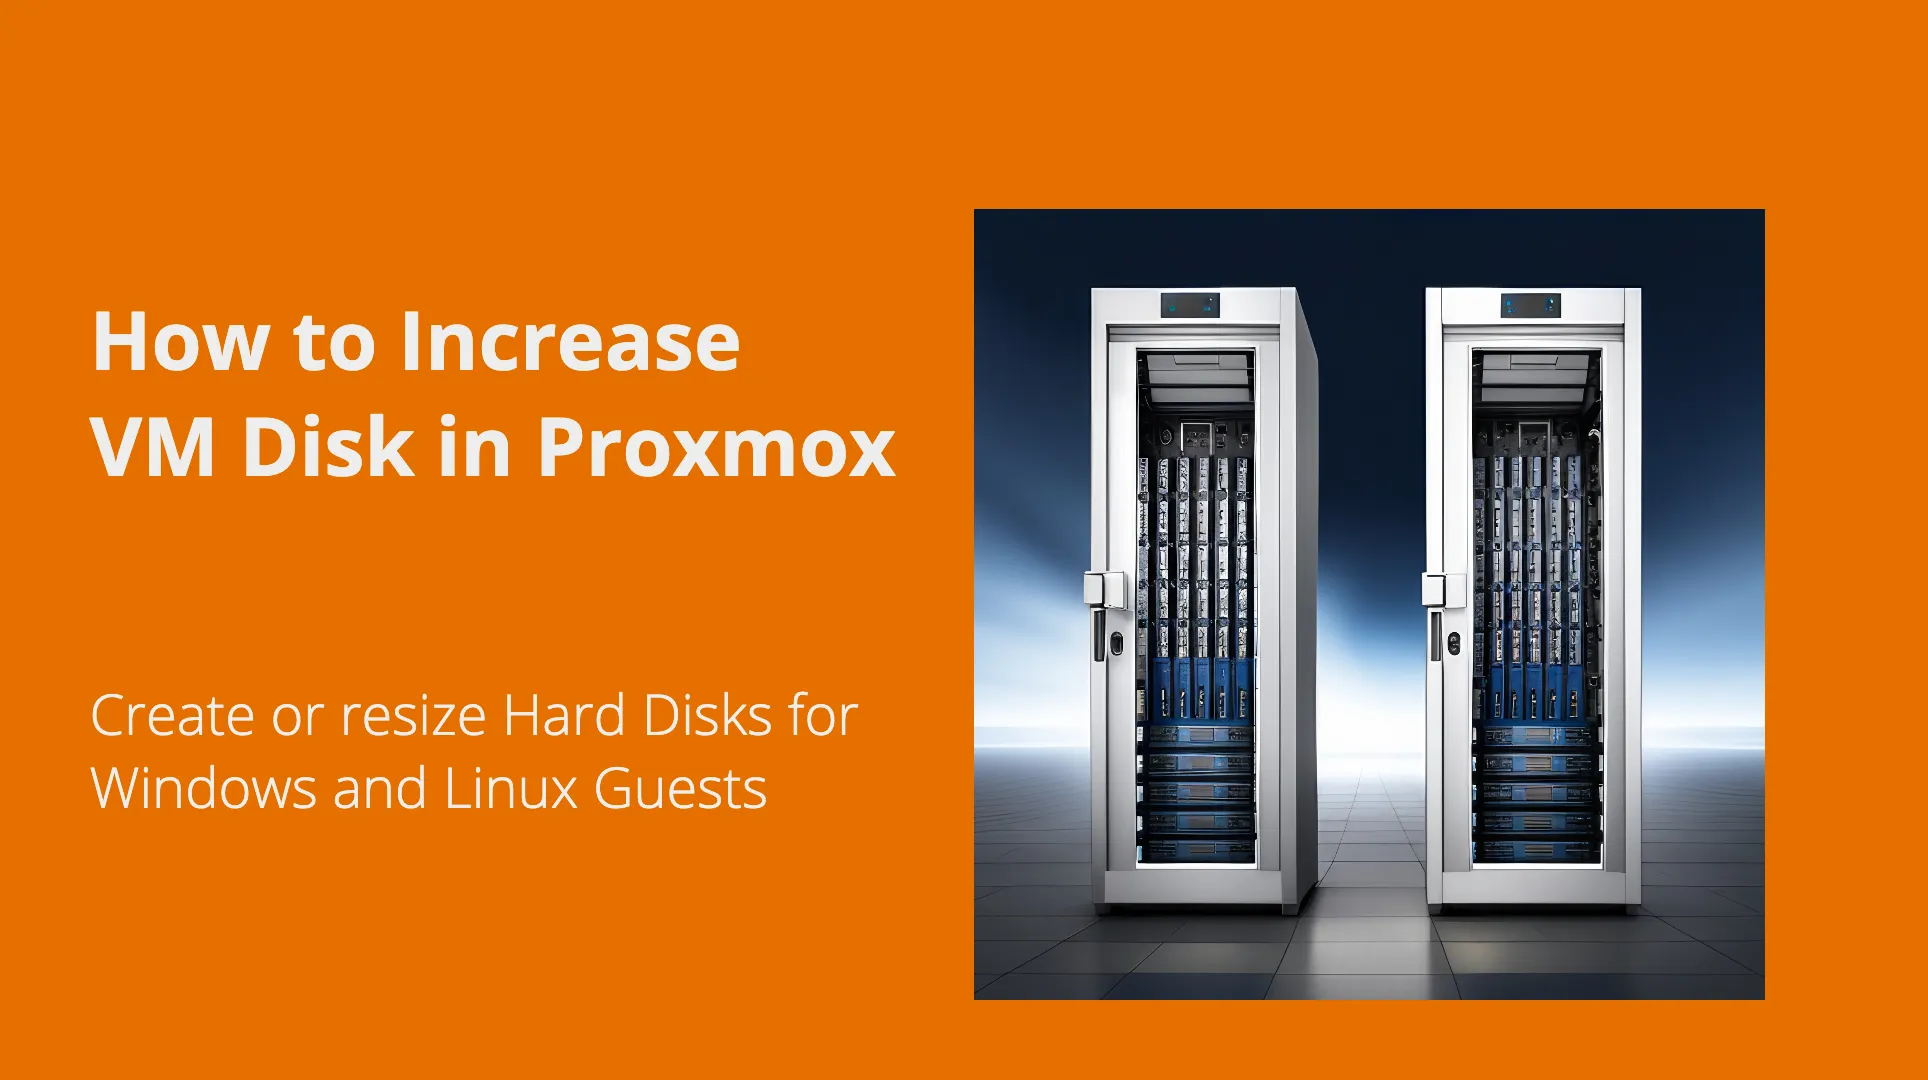 Ho to increase VM disk in Proxmox